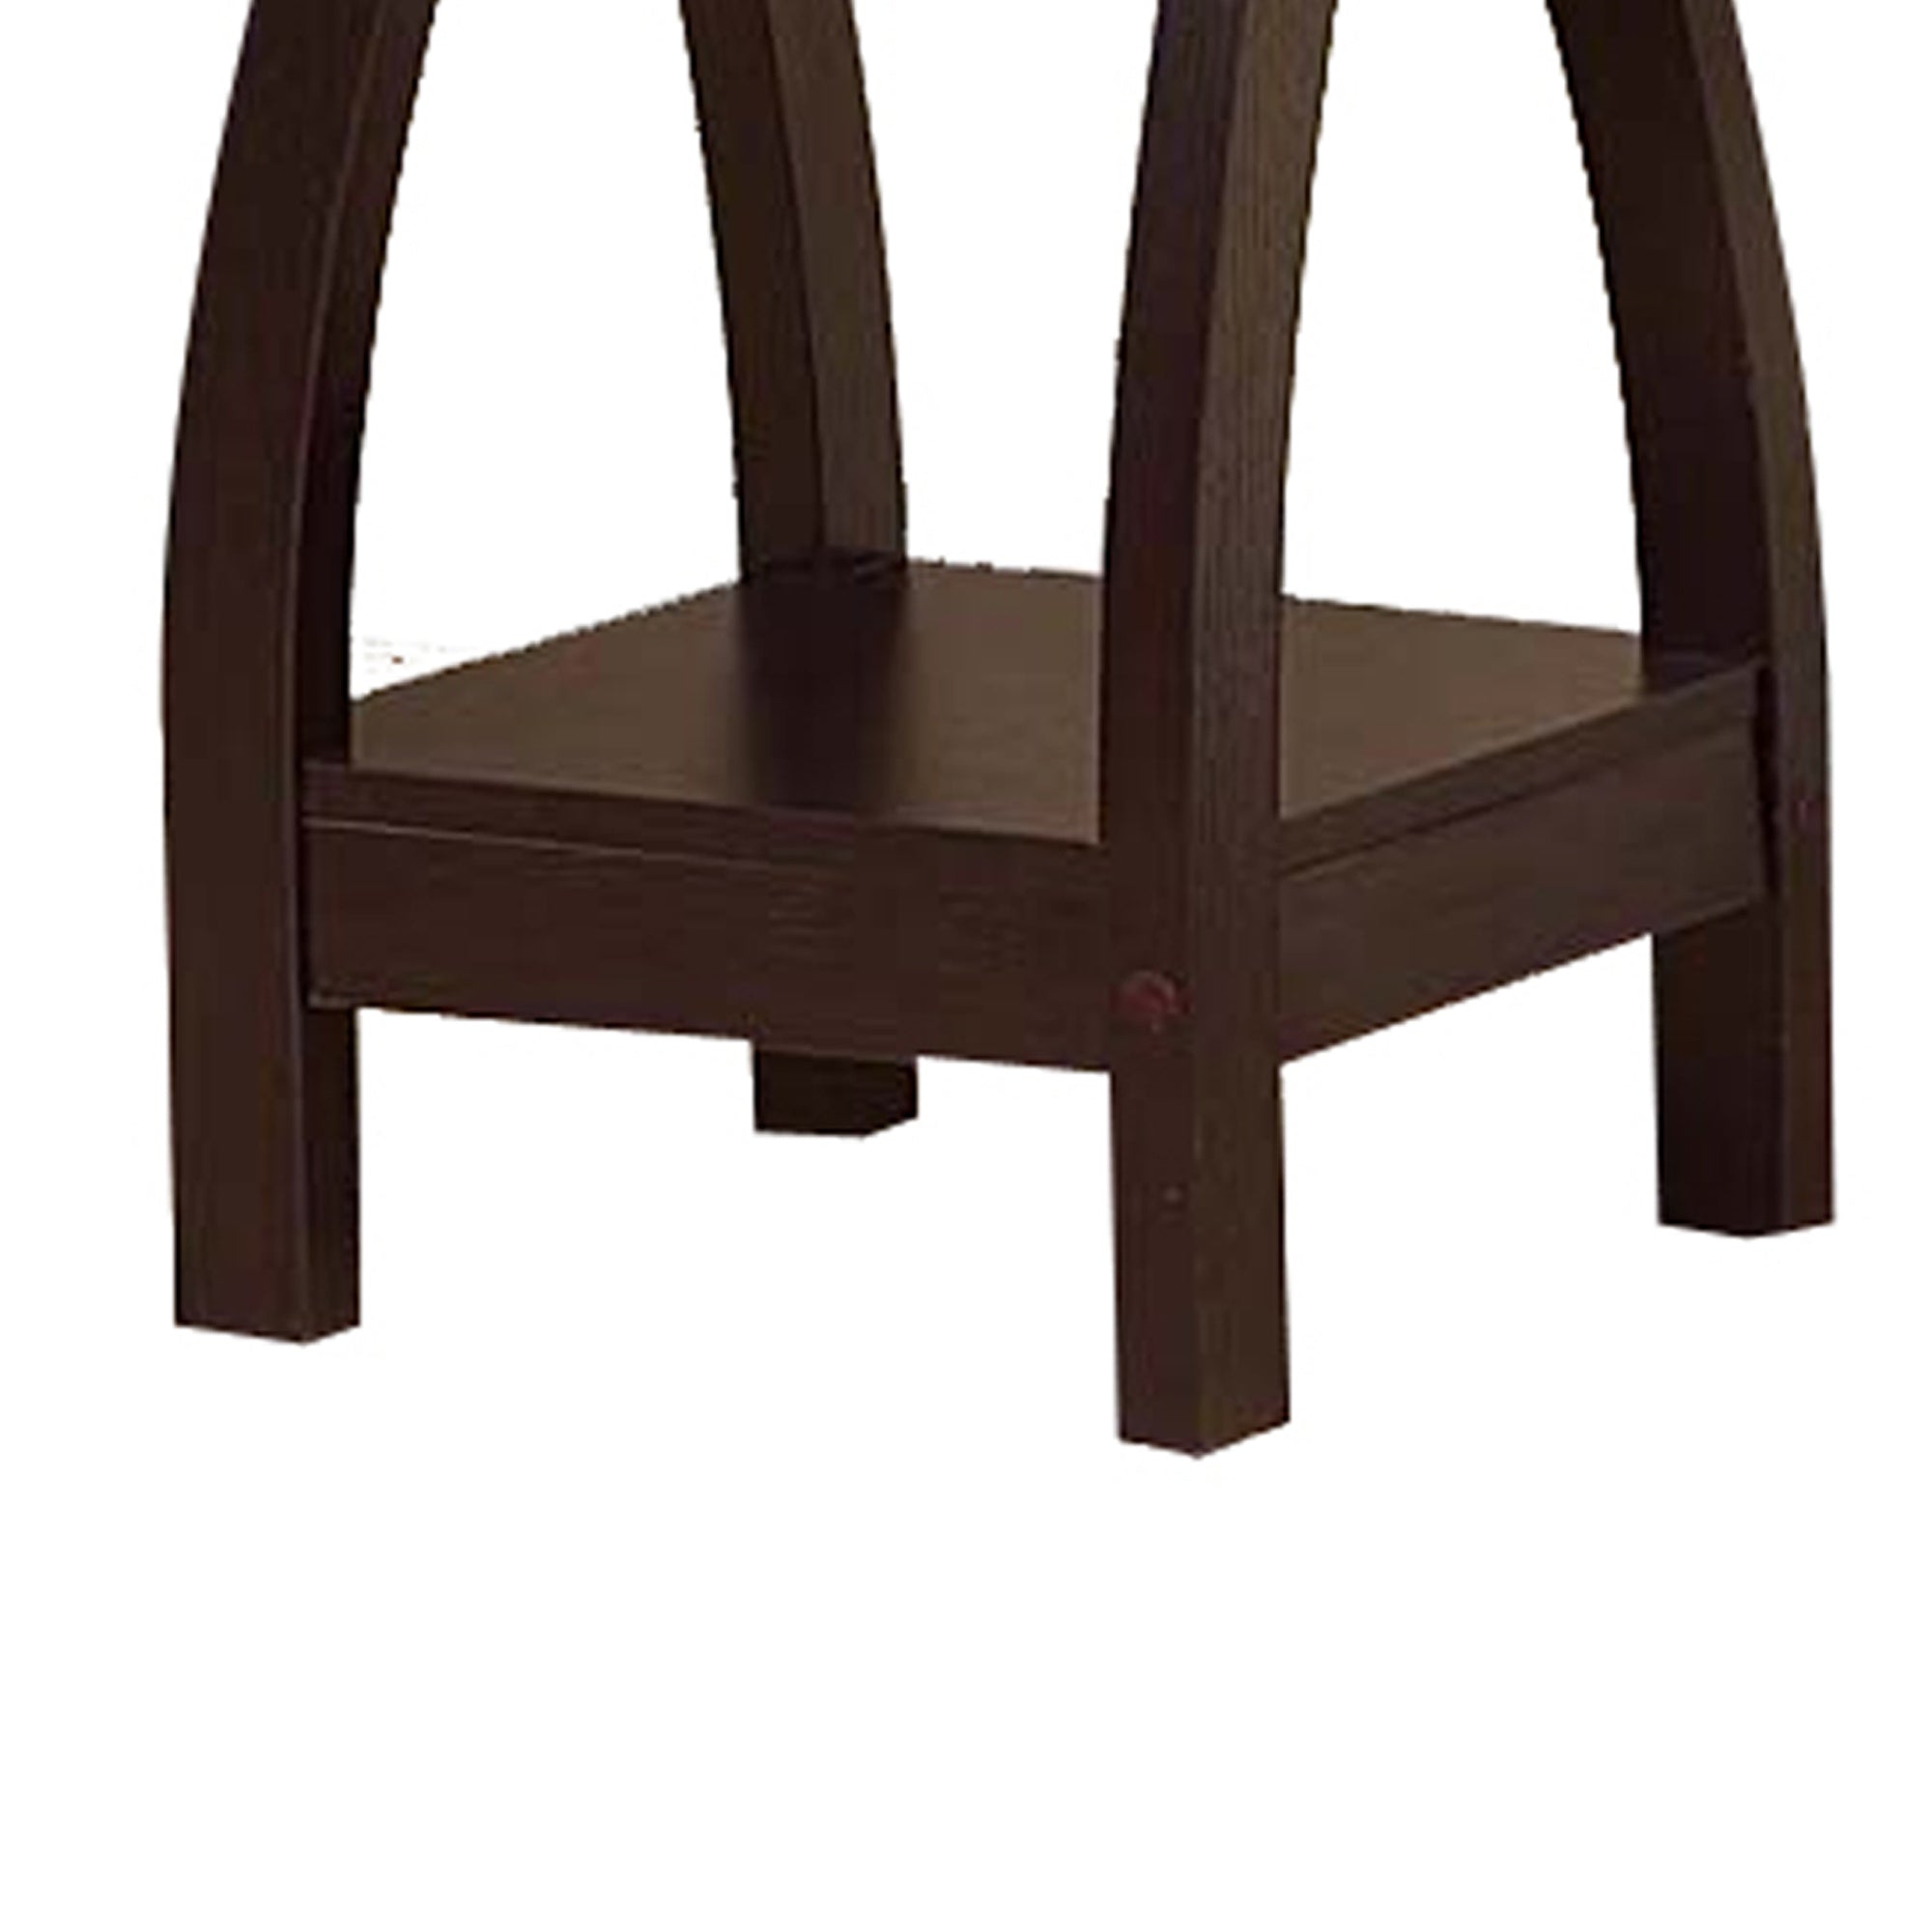 Dunawest Square Top Wooden Plant Stand With Curved Legs And Shelves, Large, Dark Brown